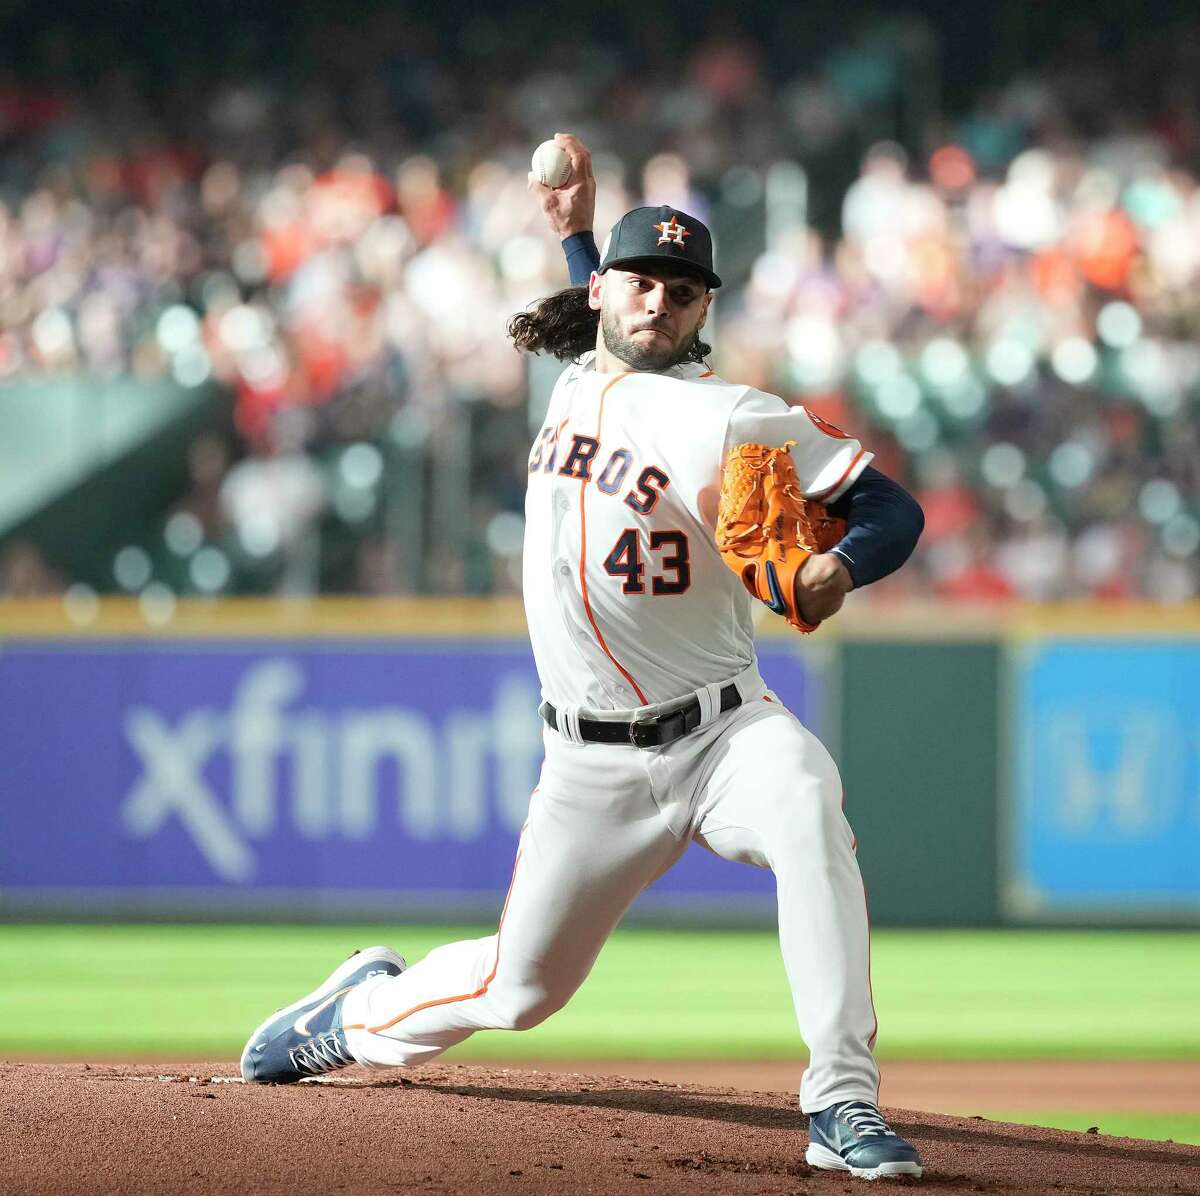 Houston Astros starting pitcher Lance McCullers Jr. (43) pitches to Oakland Athletics Sean Murphy during the first inning of an MLB game at Minute Maid Park on Saturday, Aug. 13, 2022 in Houston.